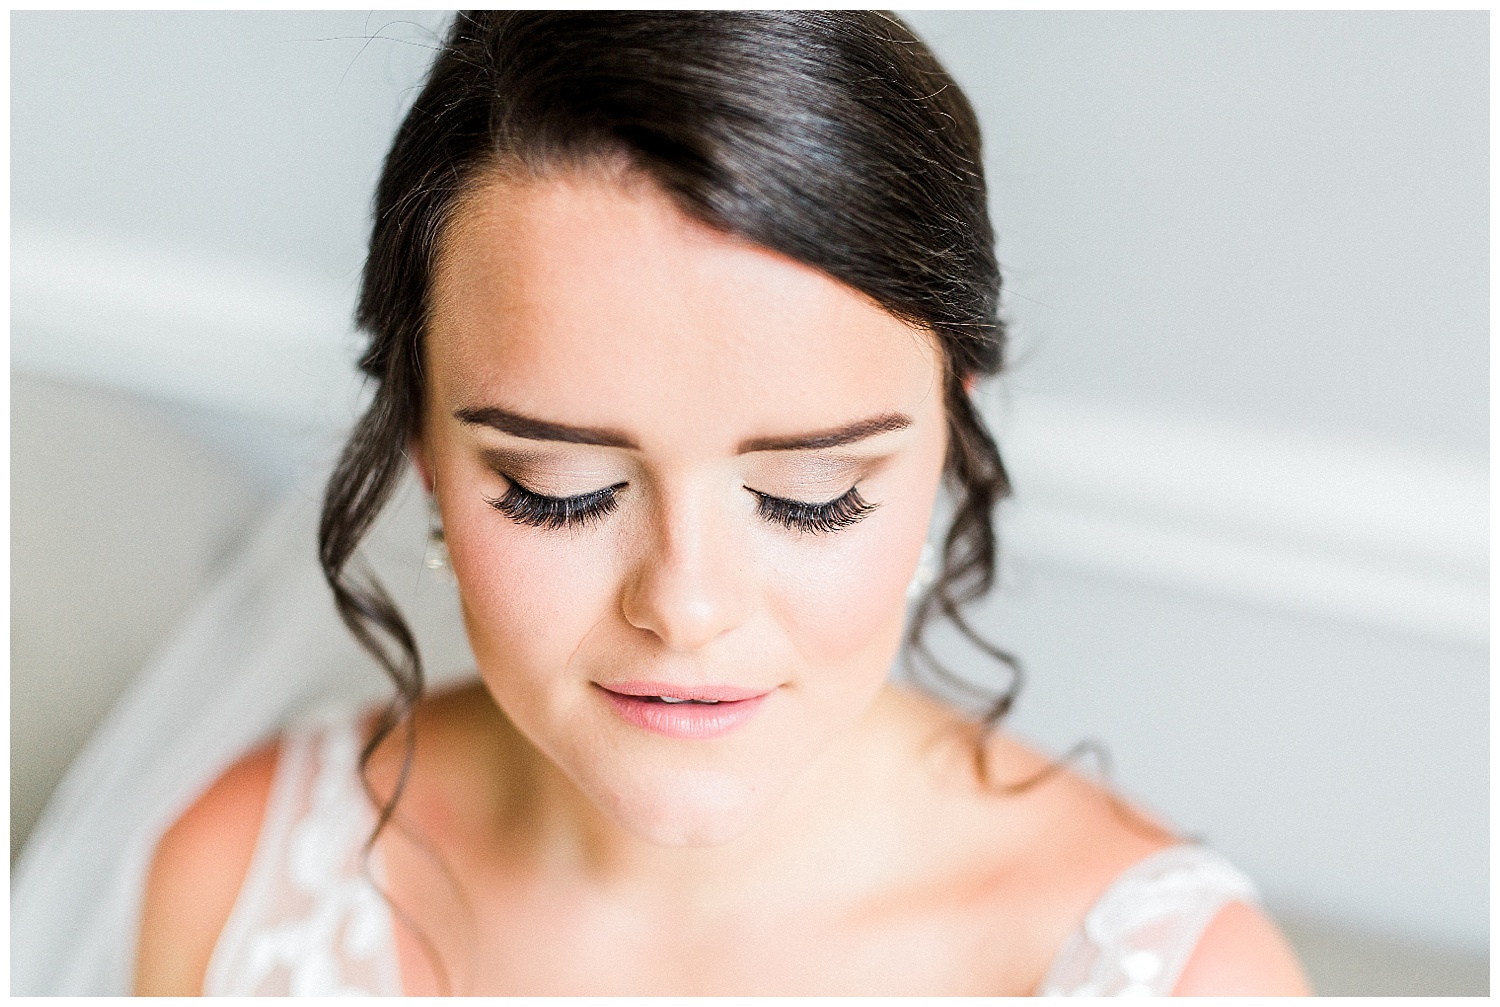 bride looking down with styled natural makeup and long eyelashes at elegant wedding venue separk mansion